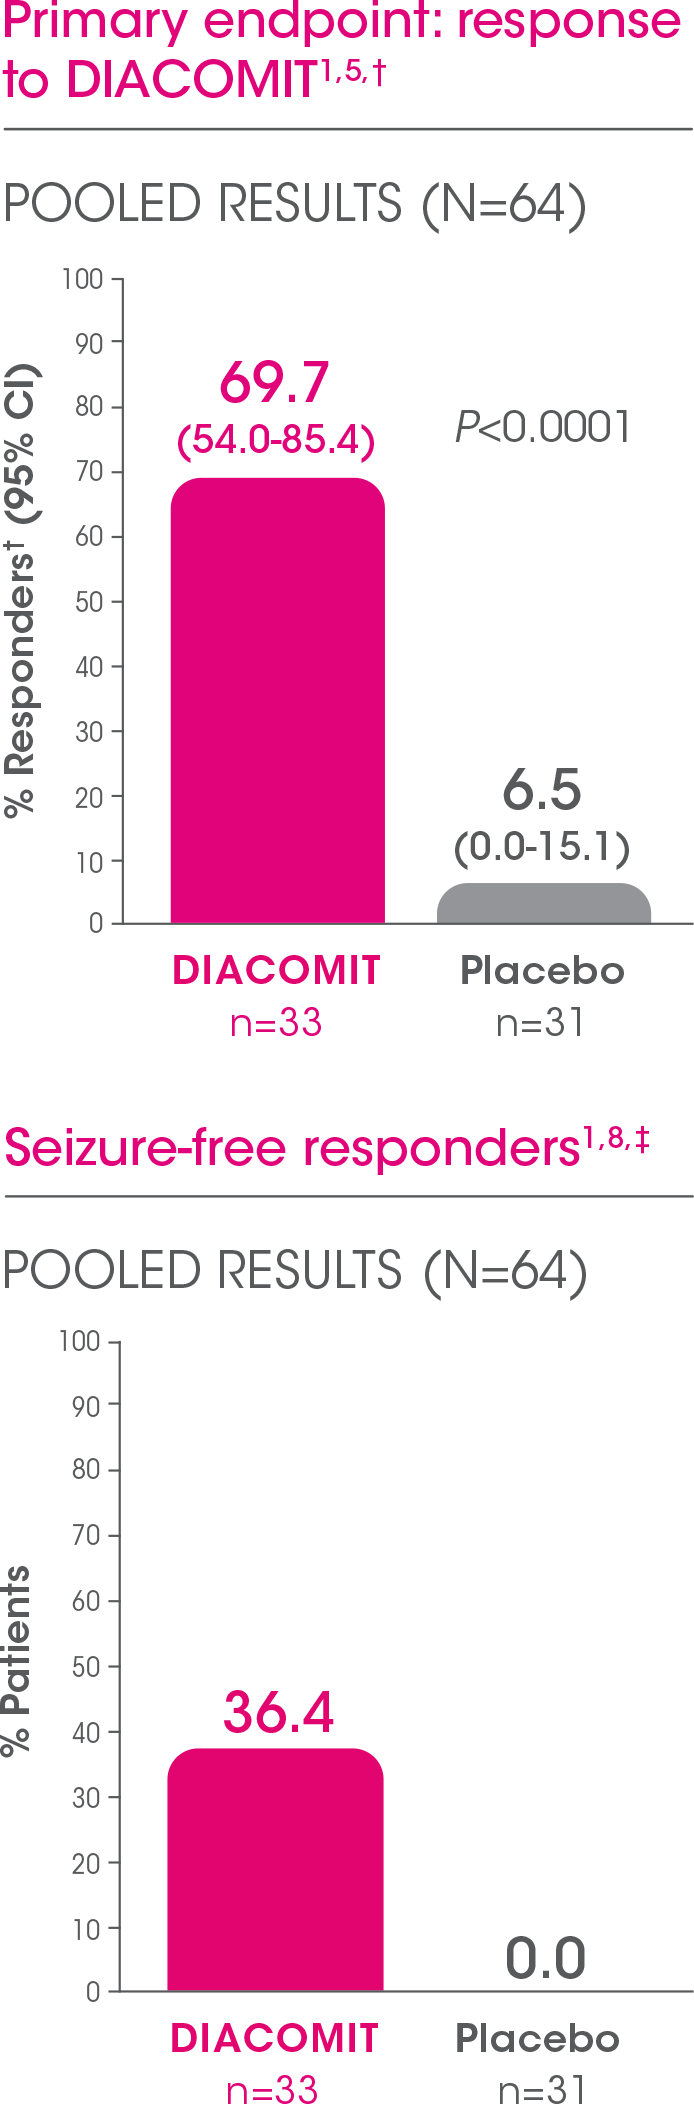 DIACOMIT offers an opportunity to significantly reduce seizure frequency